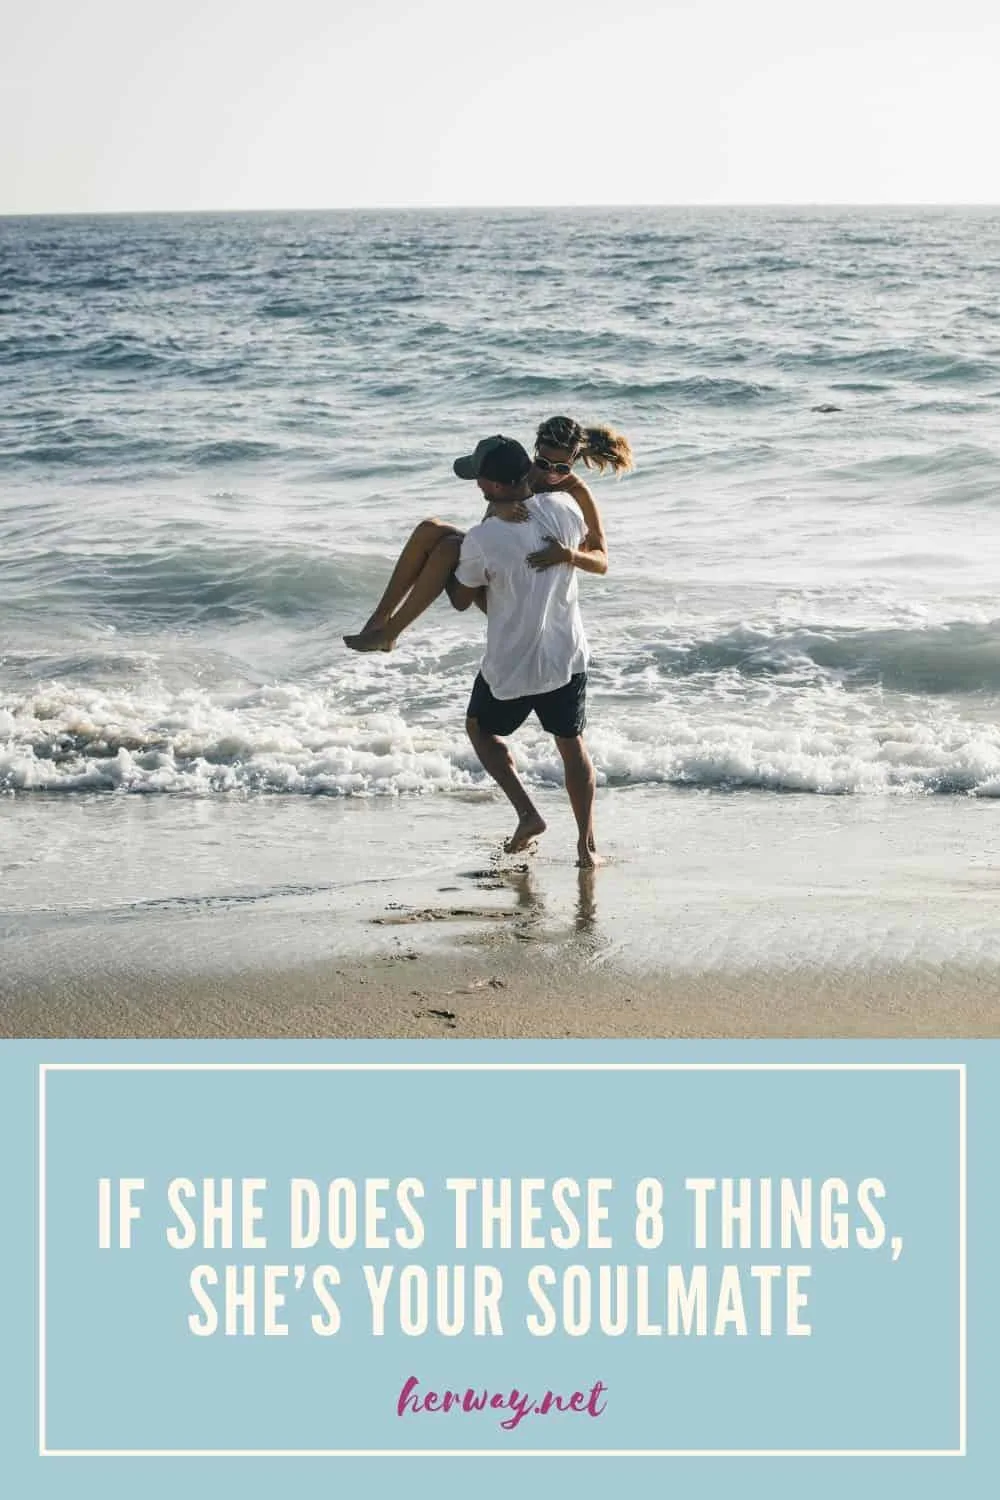 If She Does These 8 Things, She's Your Soulmate